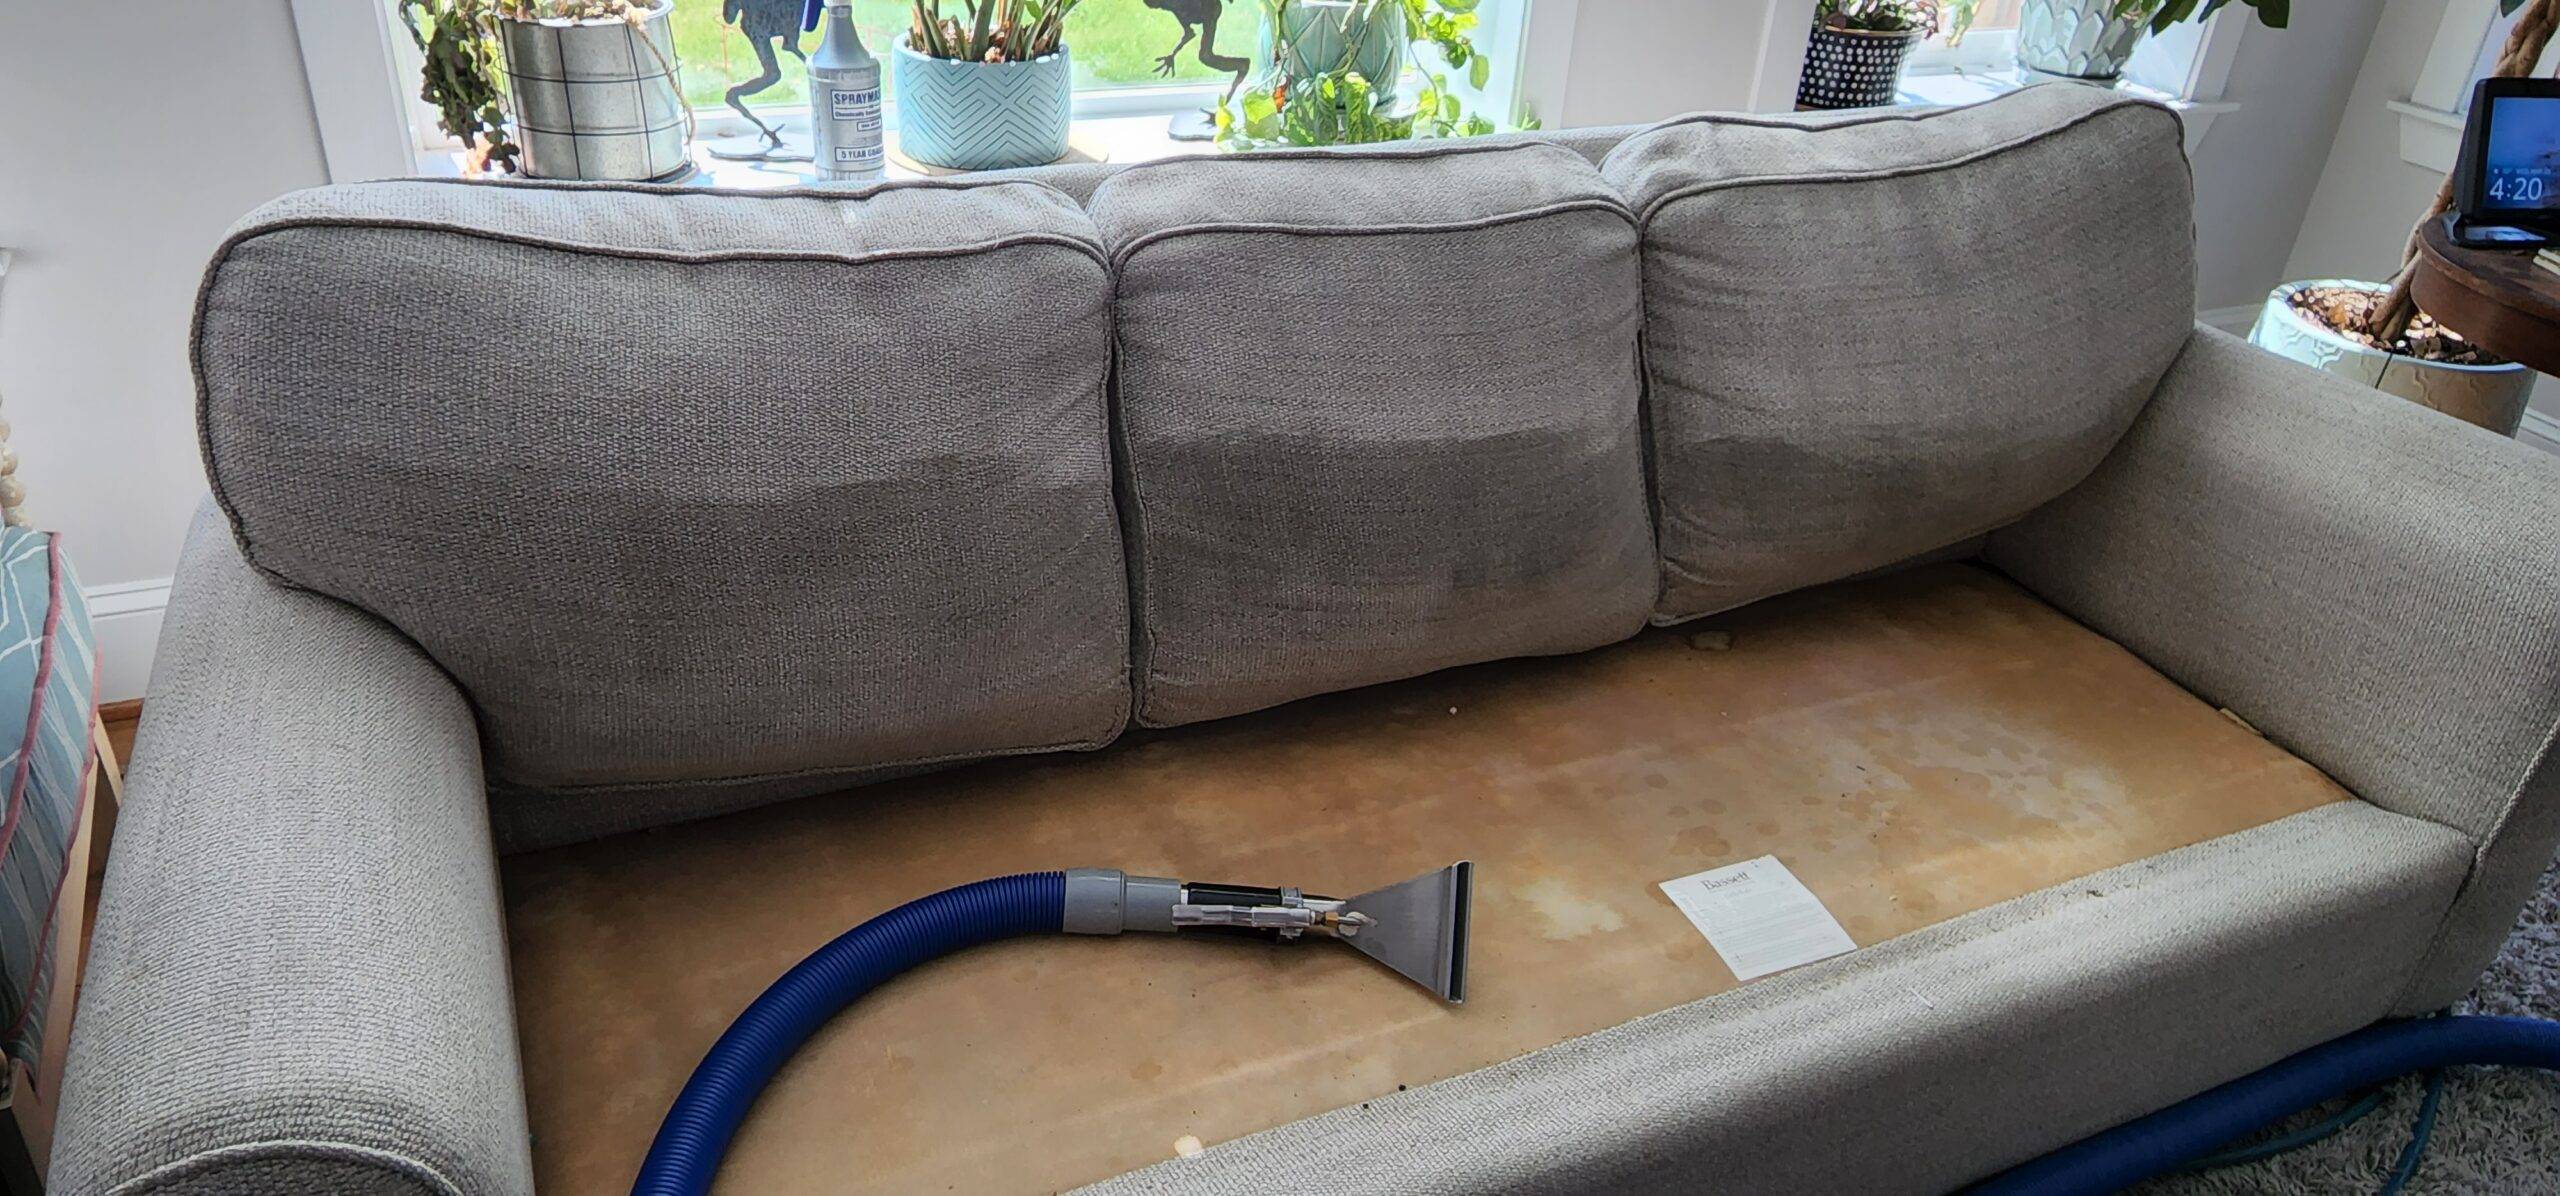 upholstery-cleaning-services-in-denver